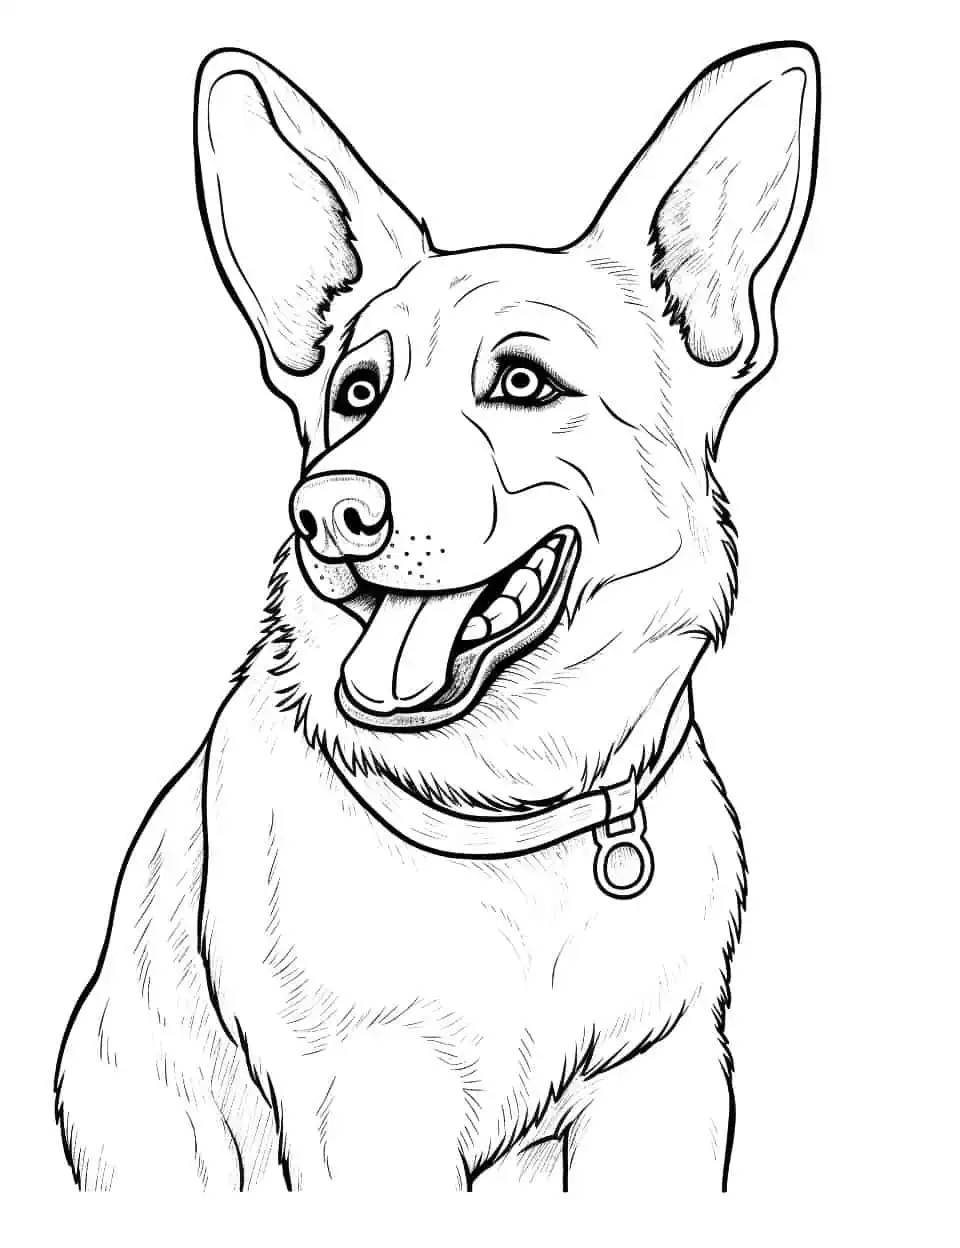 Realistic German Shepherd Coloring Page - A detailed, realistic German Shepherd ready for coloring.